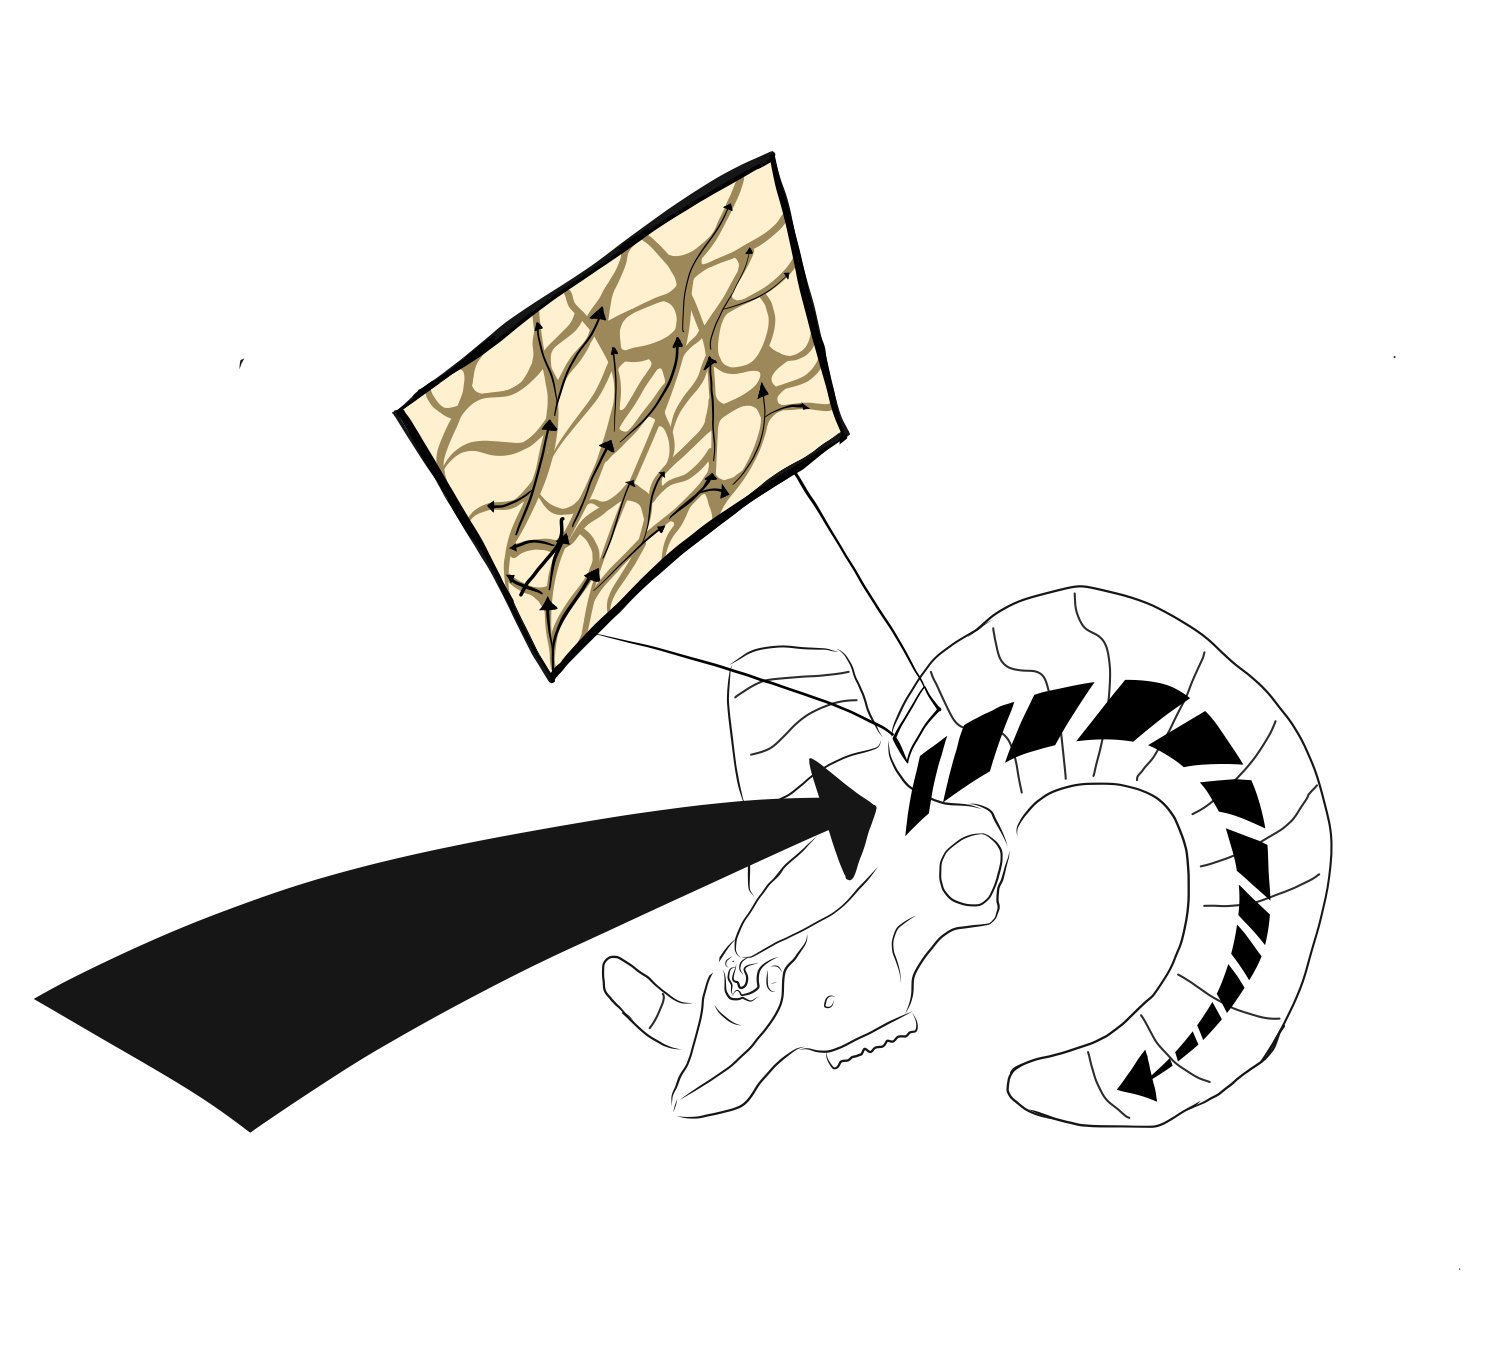 Schematic of force being applied and dissipating in bighorn sheep skull.